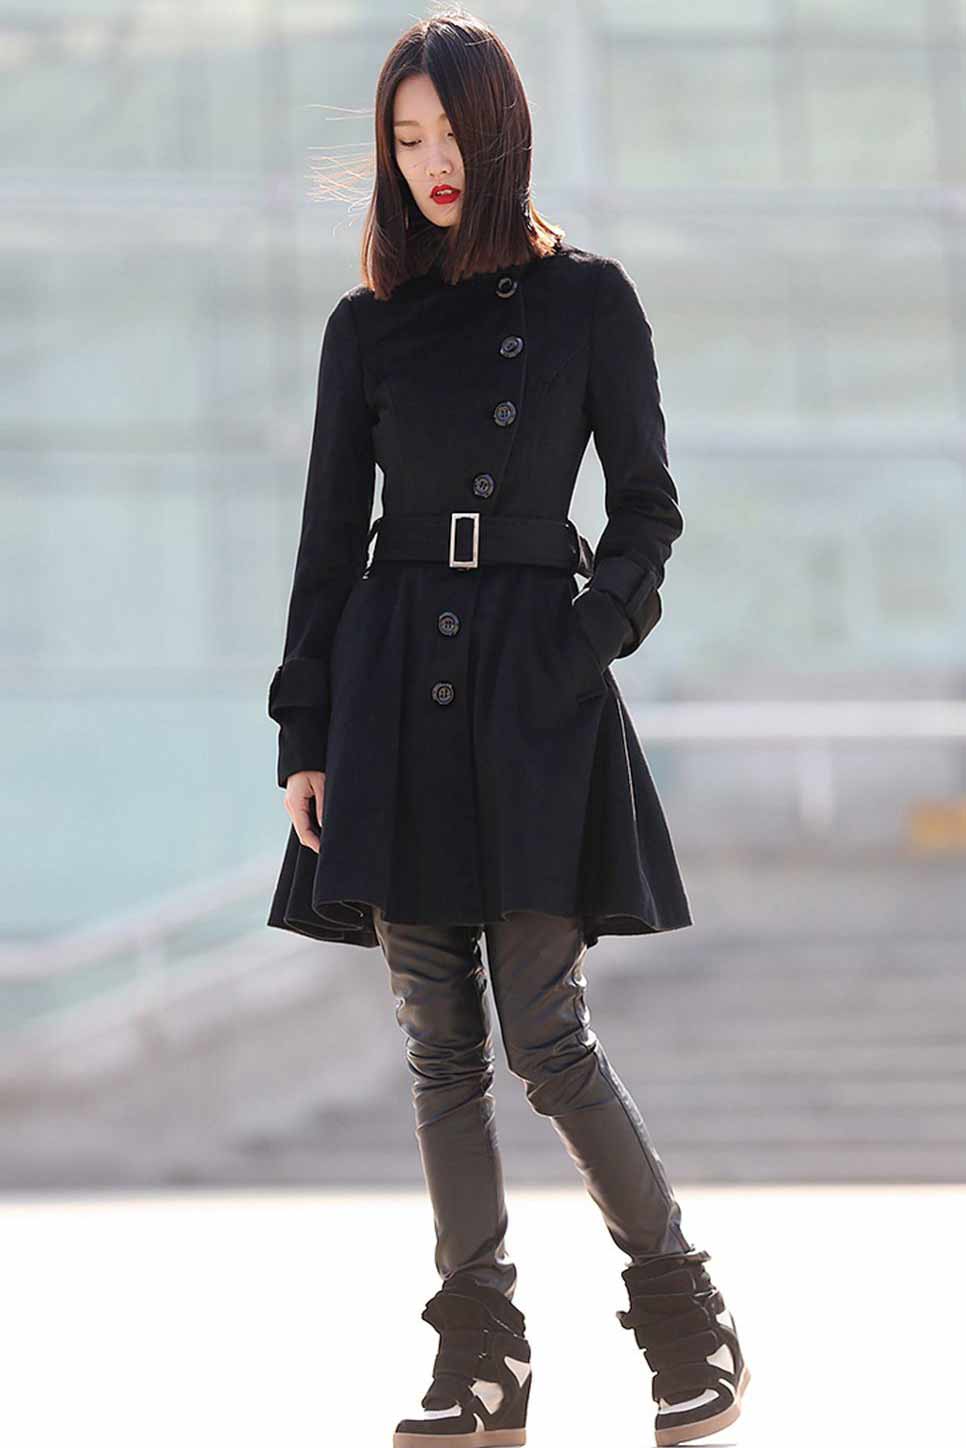 Single breasted wool jacket for winter C797#